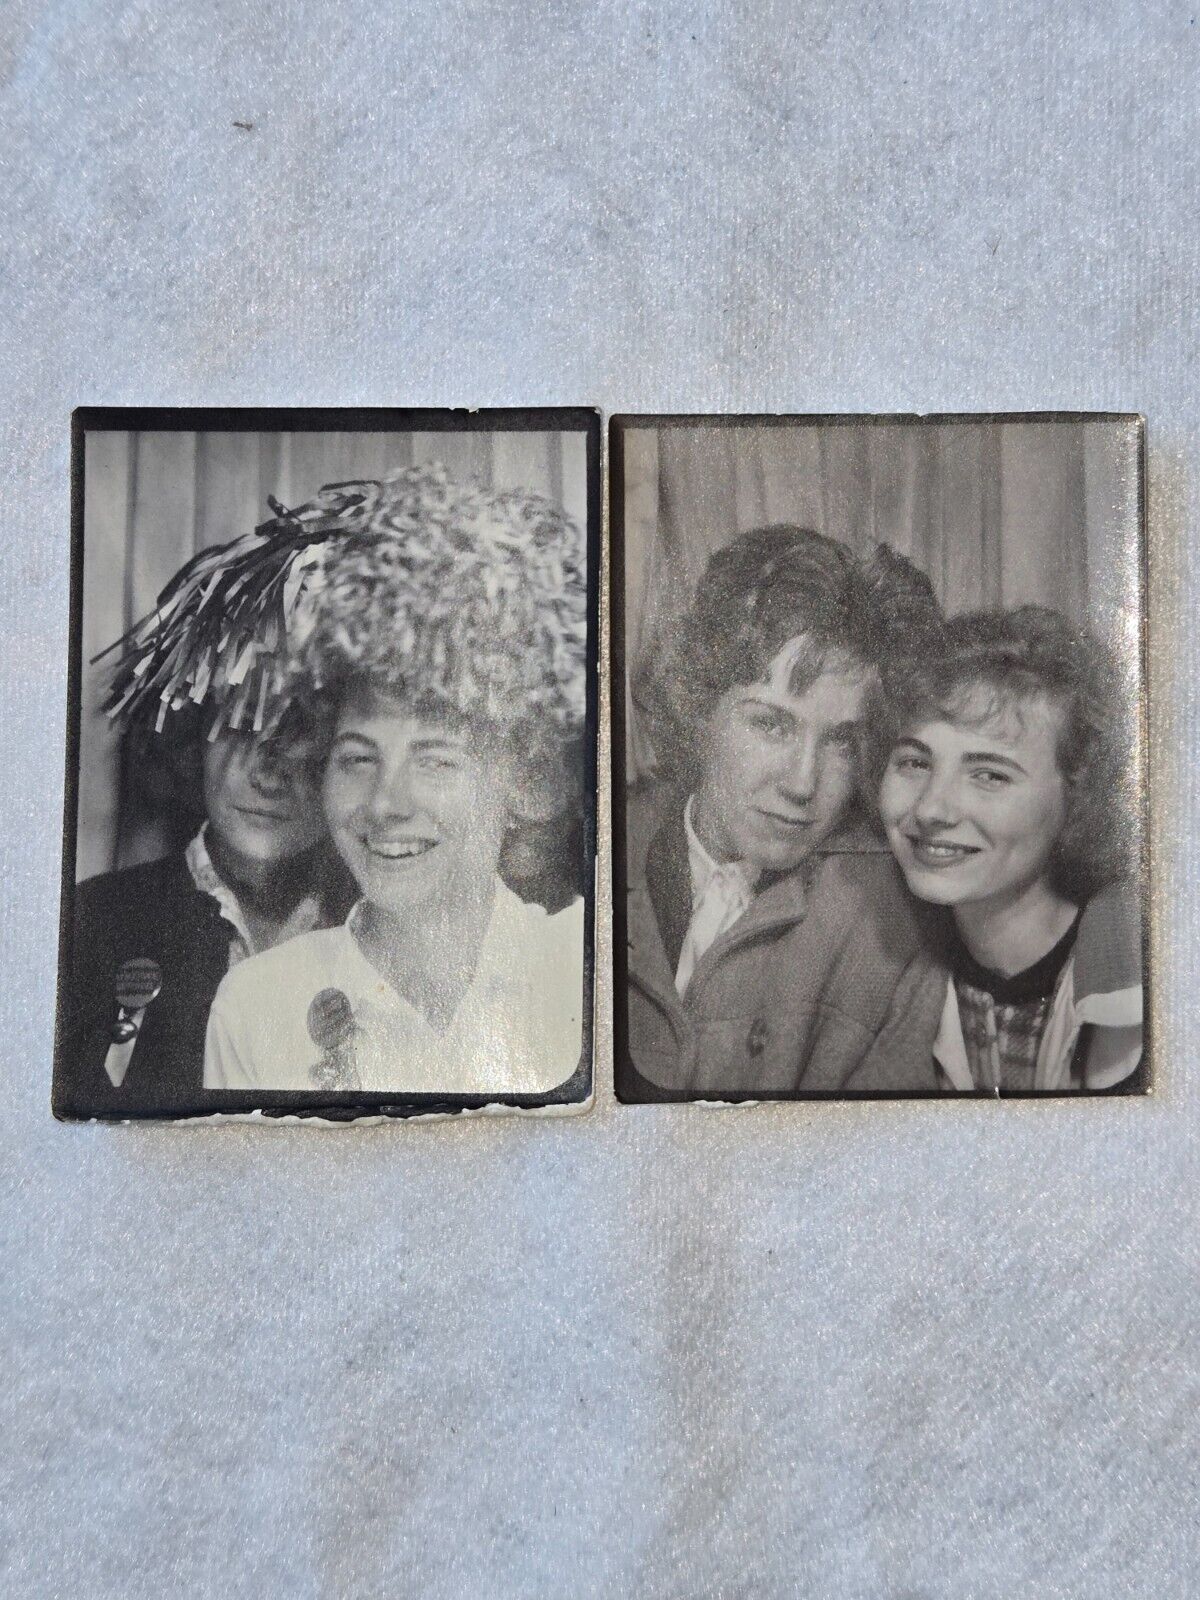 LOT OF 2 VTG 40\'S-50\'S PHOTOBOOTH PHOTOS FUN-LOVING CUTE YOUNG GIRL FRIENS